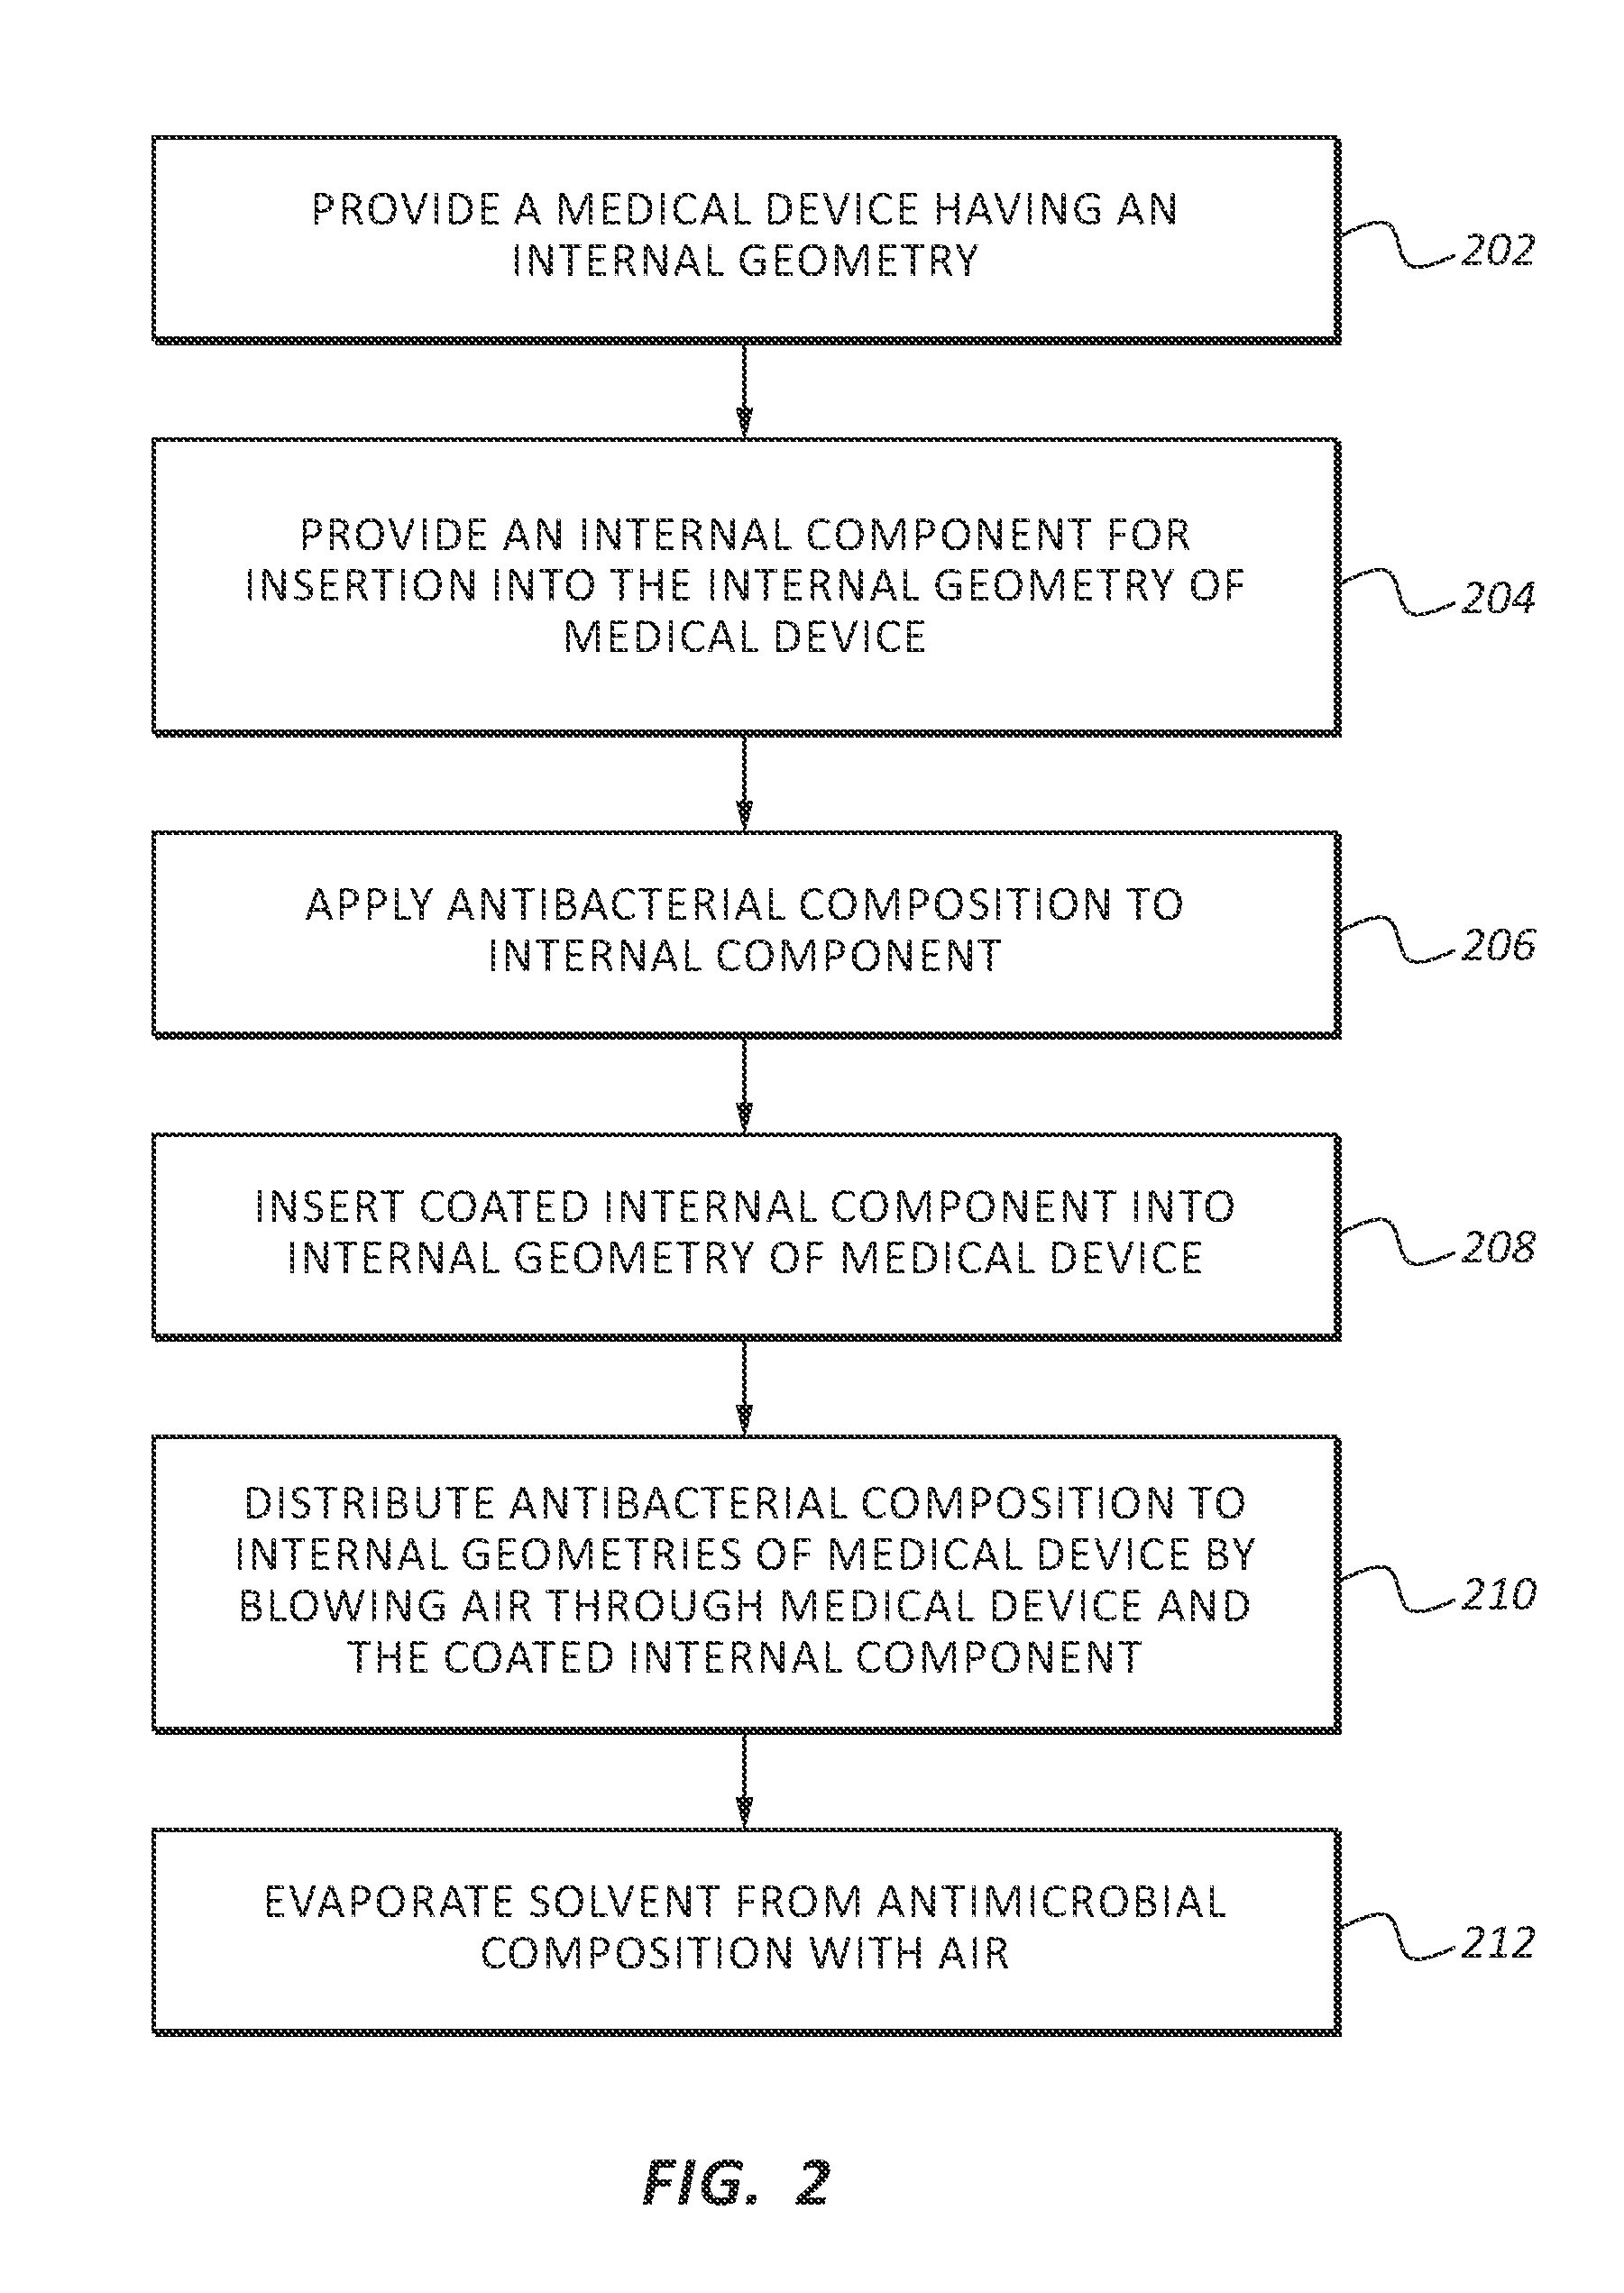 Systems and methods for applying a novel antimicrobial coating material to a medical device